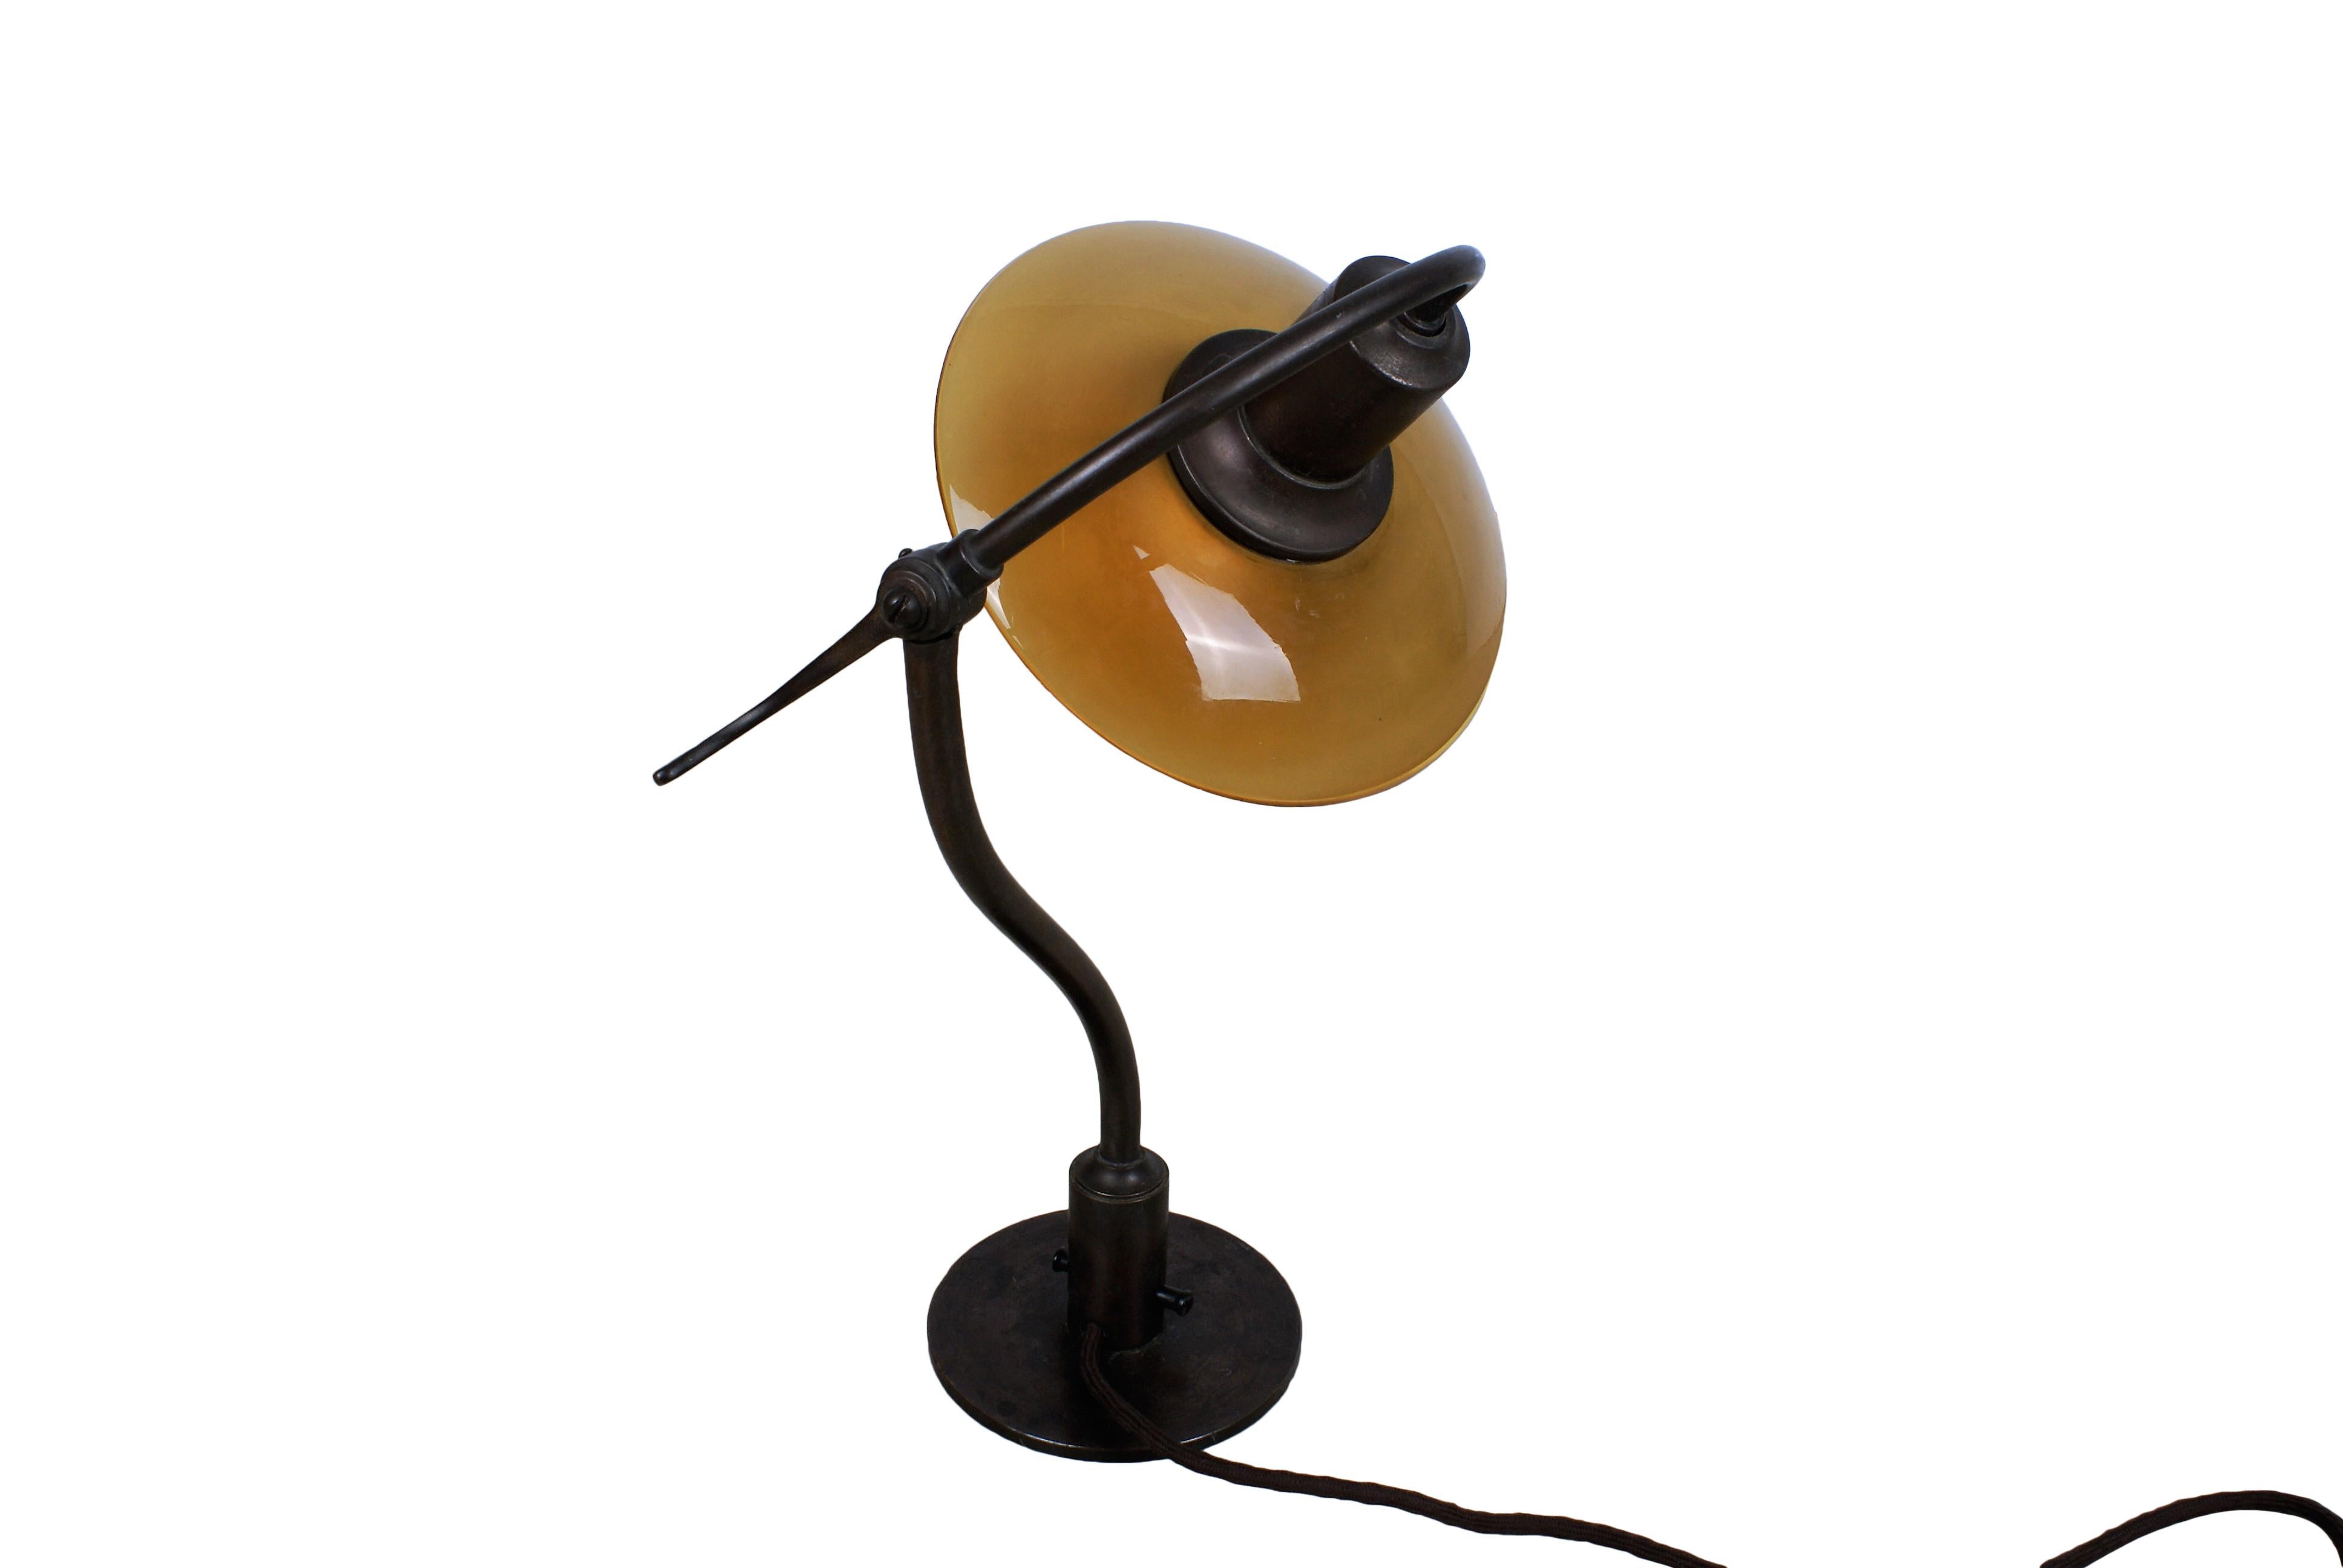 Danish Poul Henningsen 2/2 'Question Mark' Desk Lamp with Amber Colored Glass, 1930s